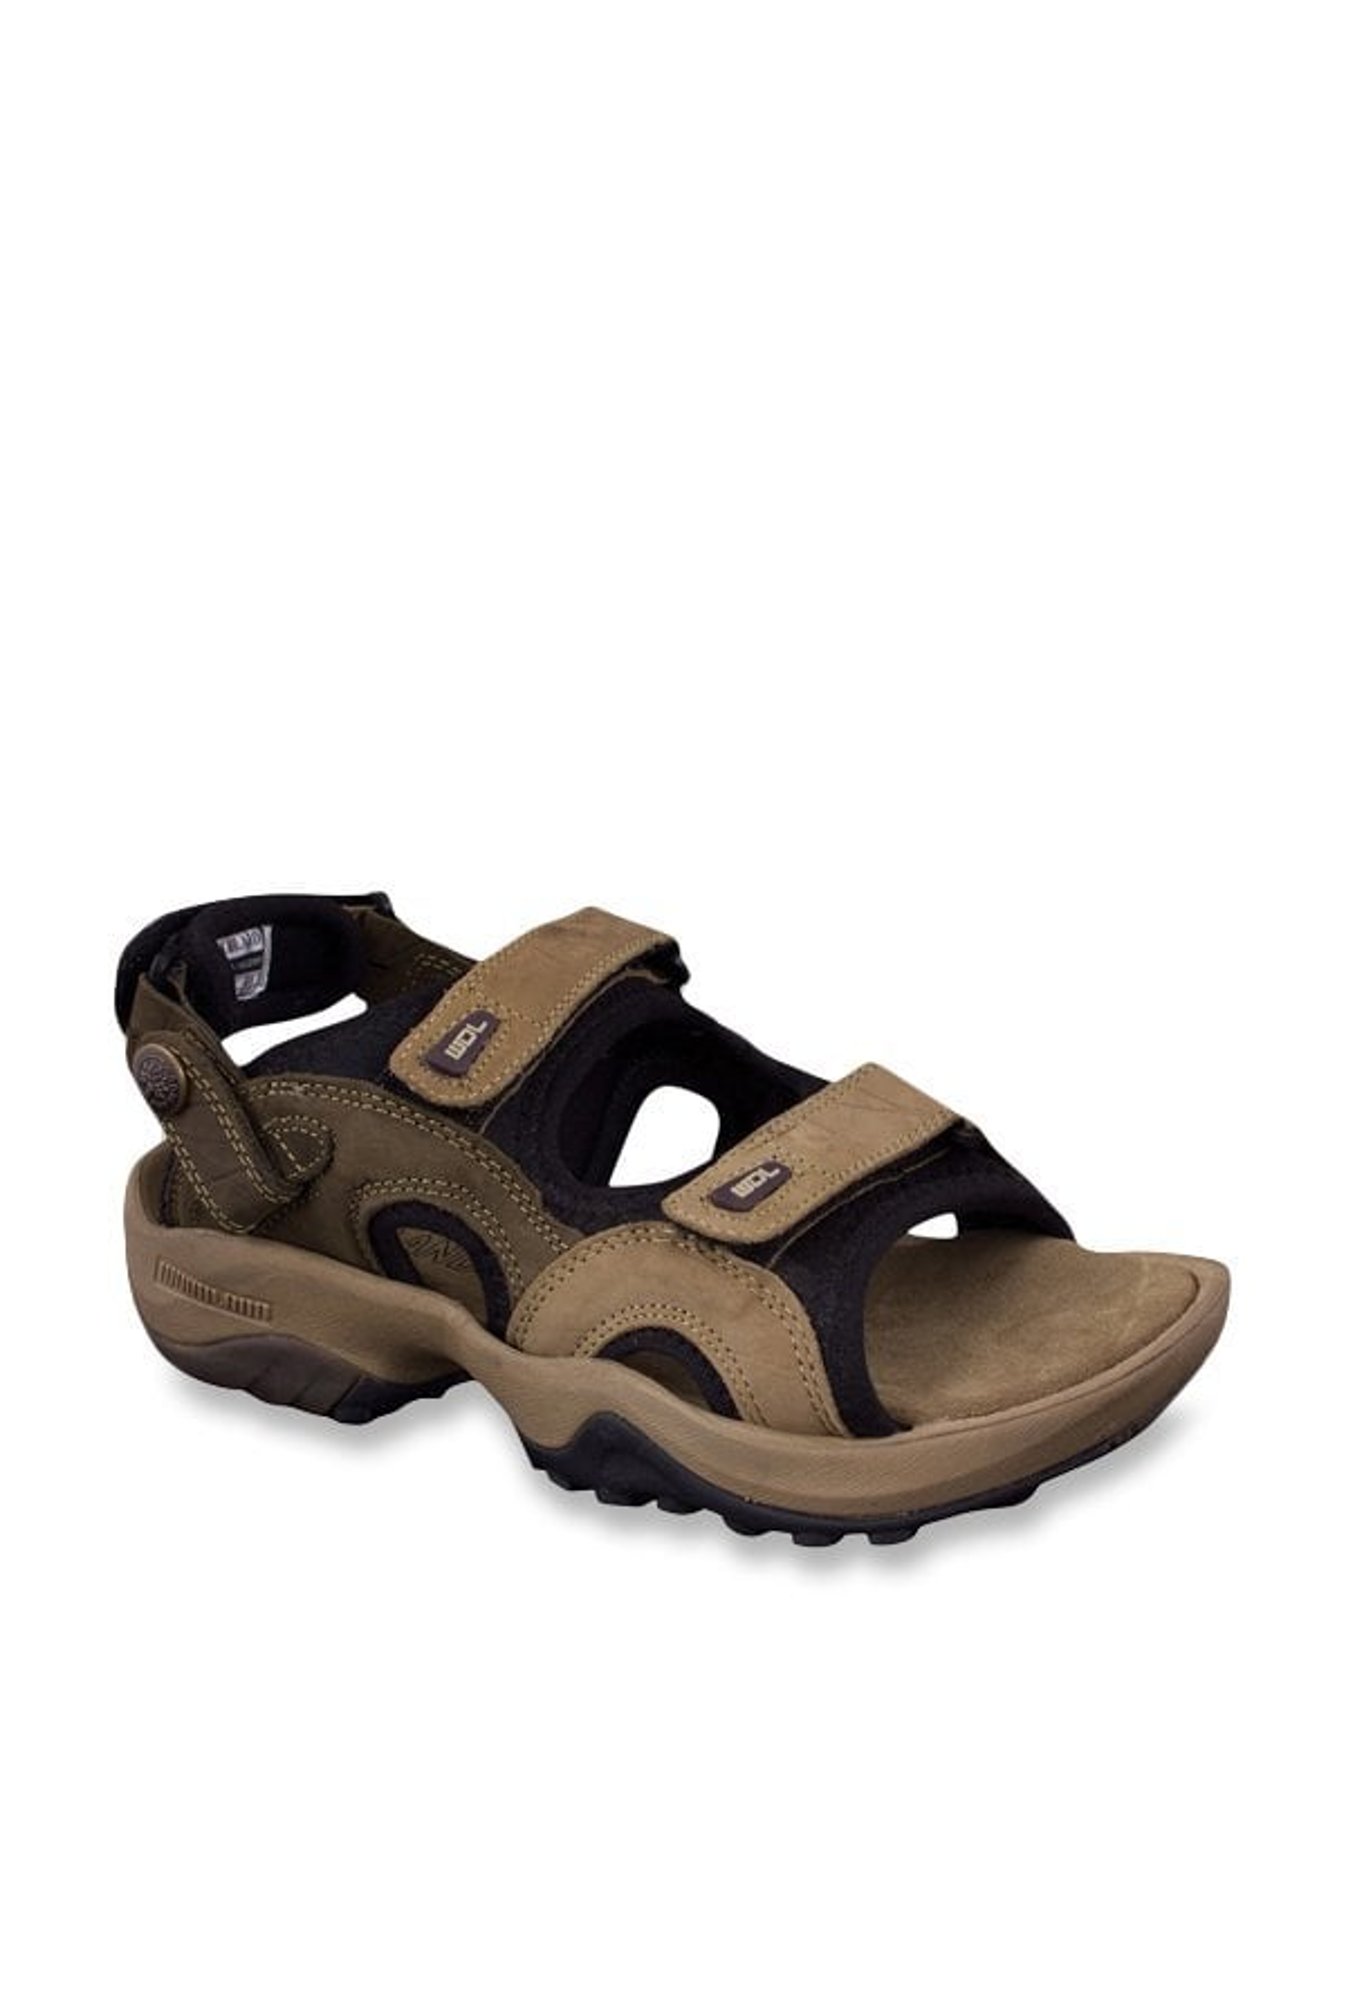 Buy Woodland Green Mens Floater Sandals on Snapdeal | PaisaWapas.com